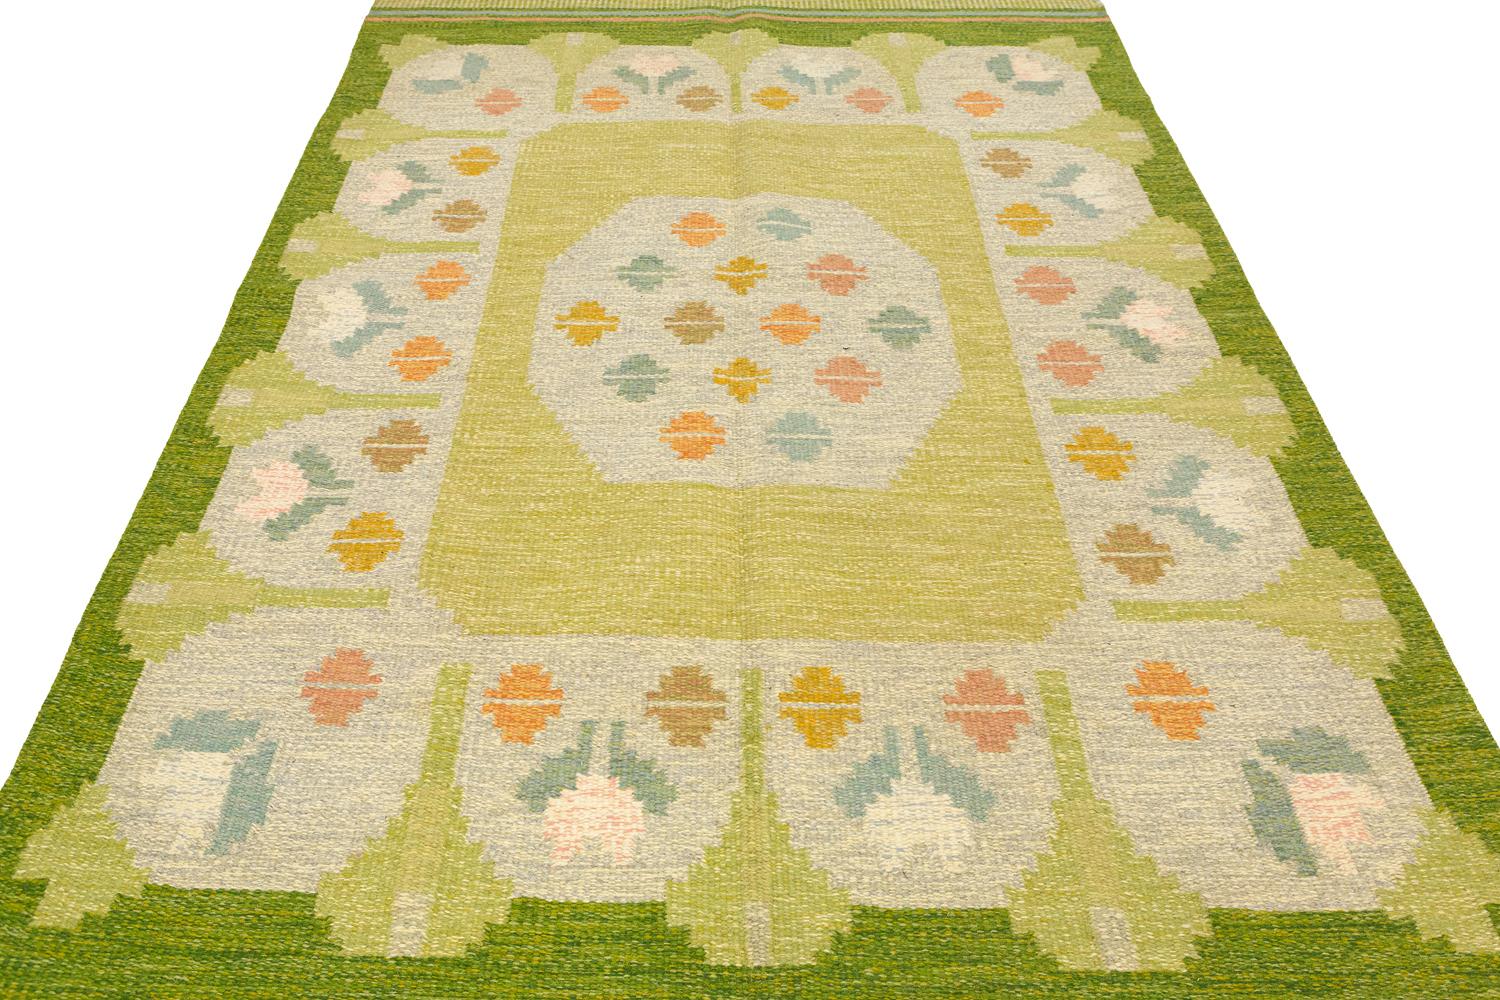 Hand-Knotted Vintage Swedish Flat-Weave Kilim by Anna Joanna Angstrom, ca. 1950 For Sale